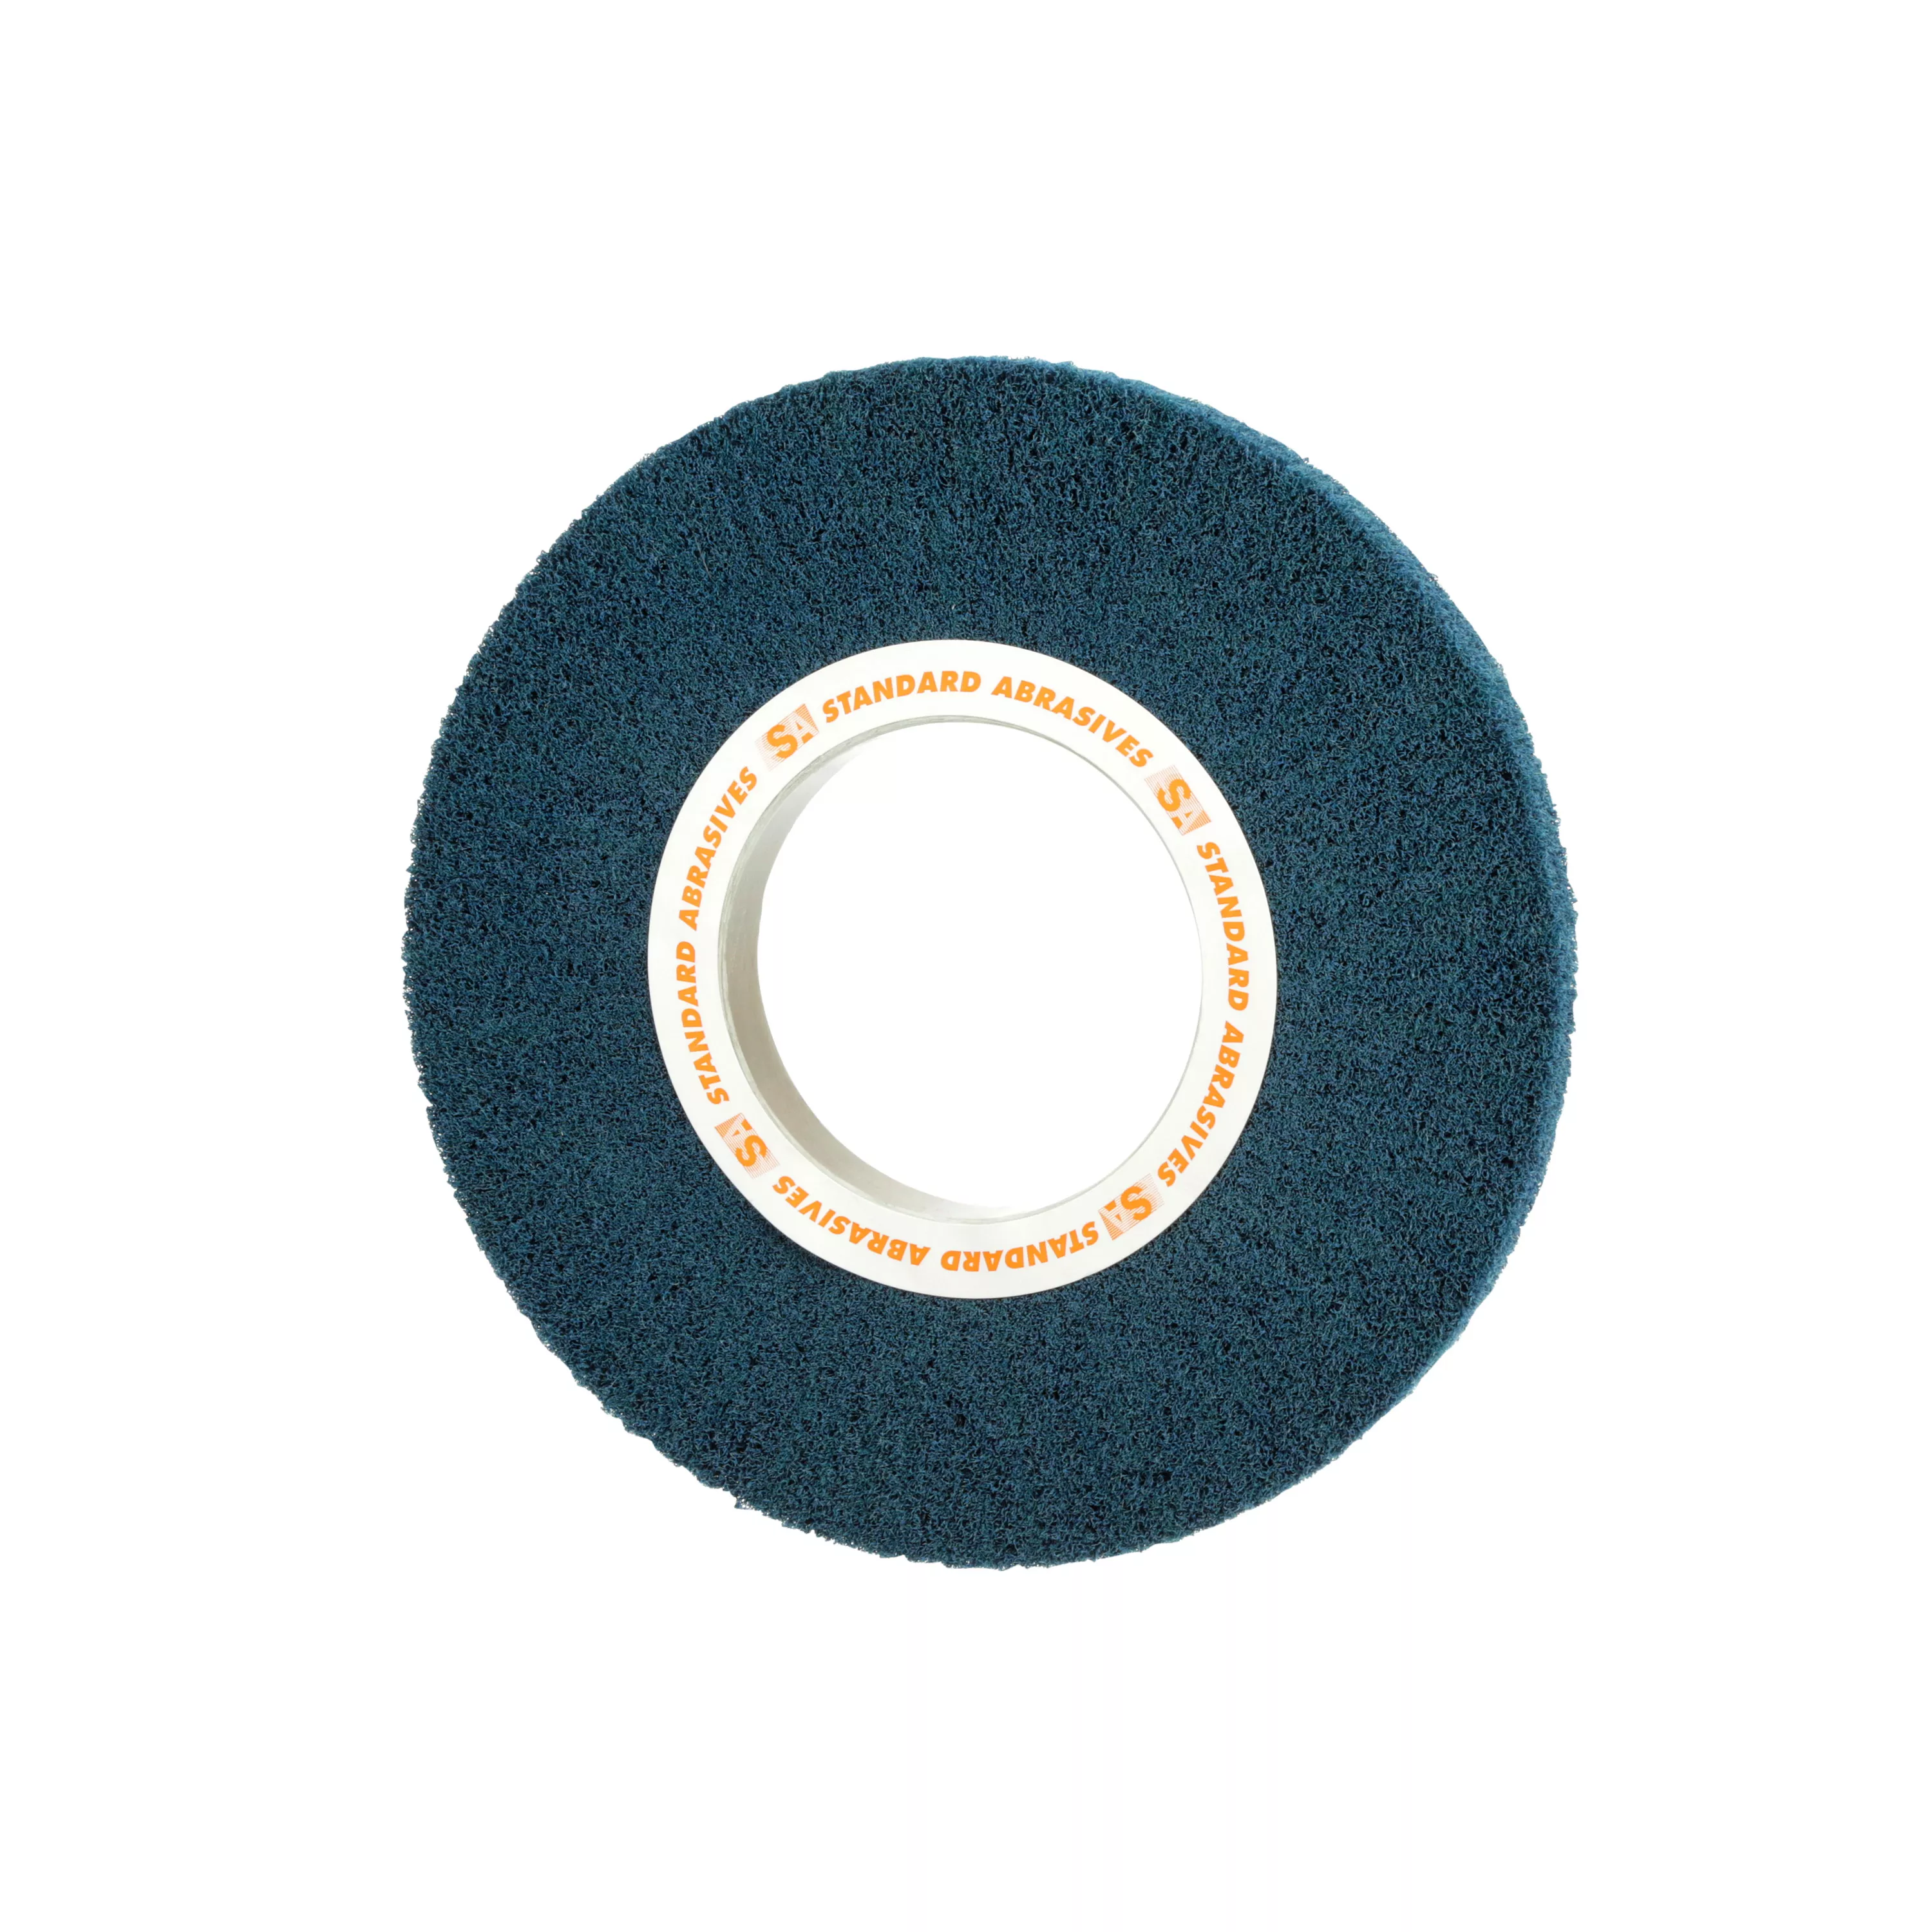 Product Number 875176 | Standard Abrasives™ Buff and Blend HS-F Flap Brush 875176